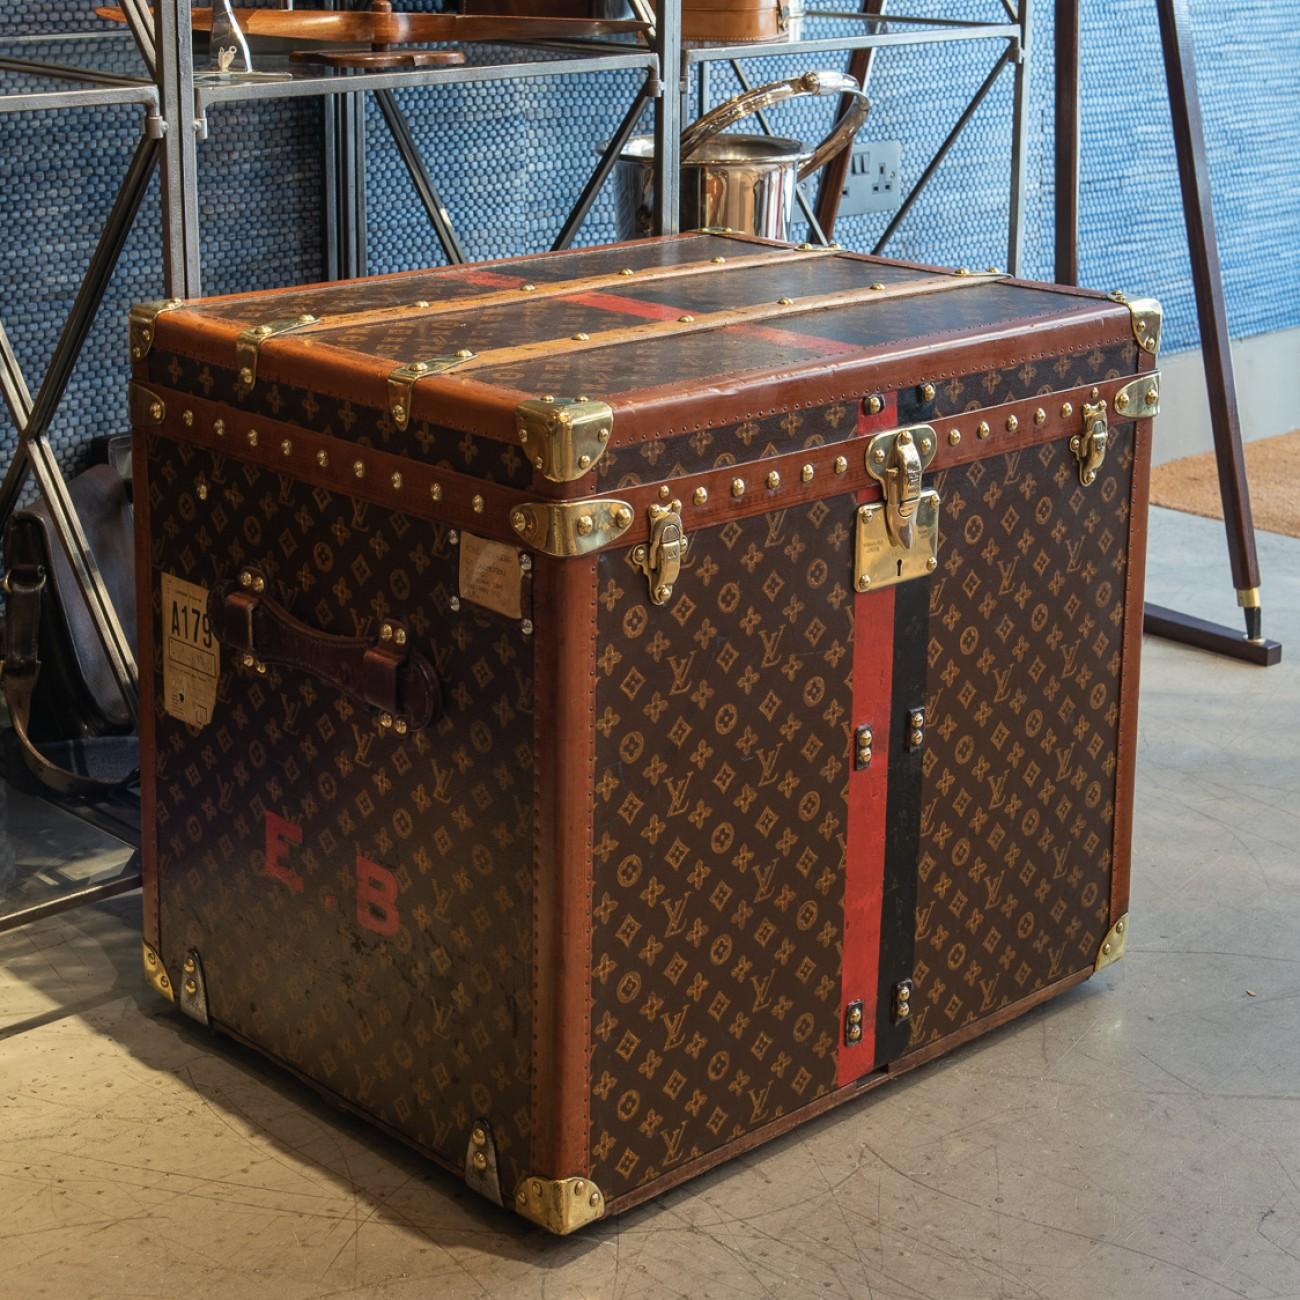 Wonderful set of two Louis Vuitton trunks in LV monogram pattern with original painted identification stripe and initials, EB. The set consists of:

A Louis Vuitton hat trunk with original tray and cage to the interior.
Dimensions: 53.5 cm/21?